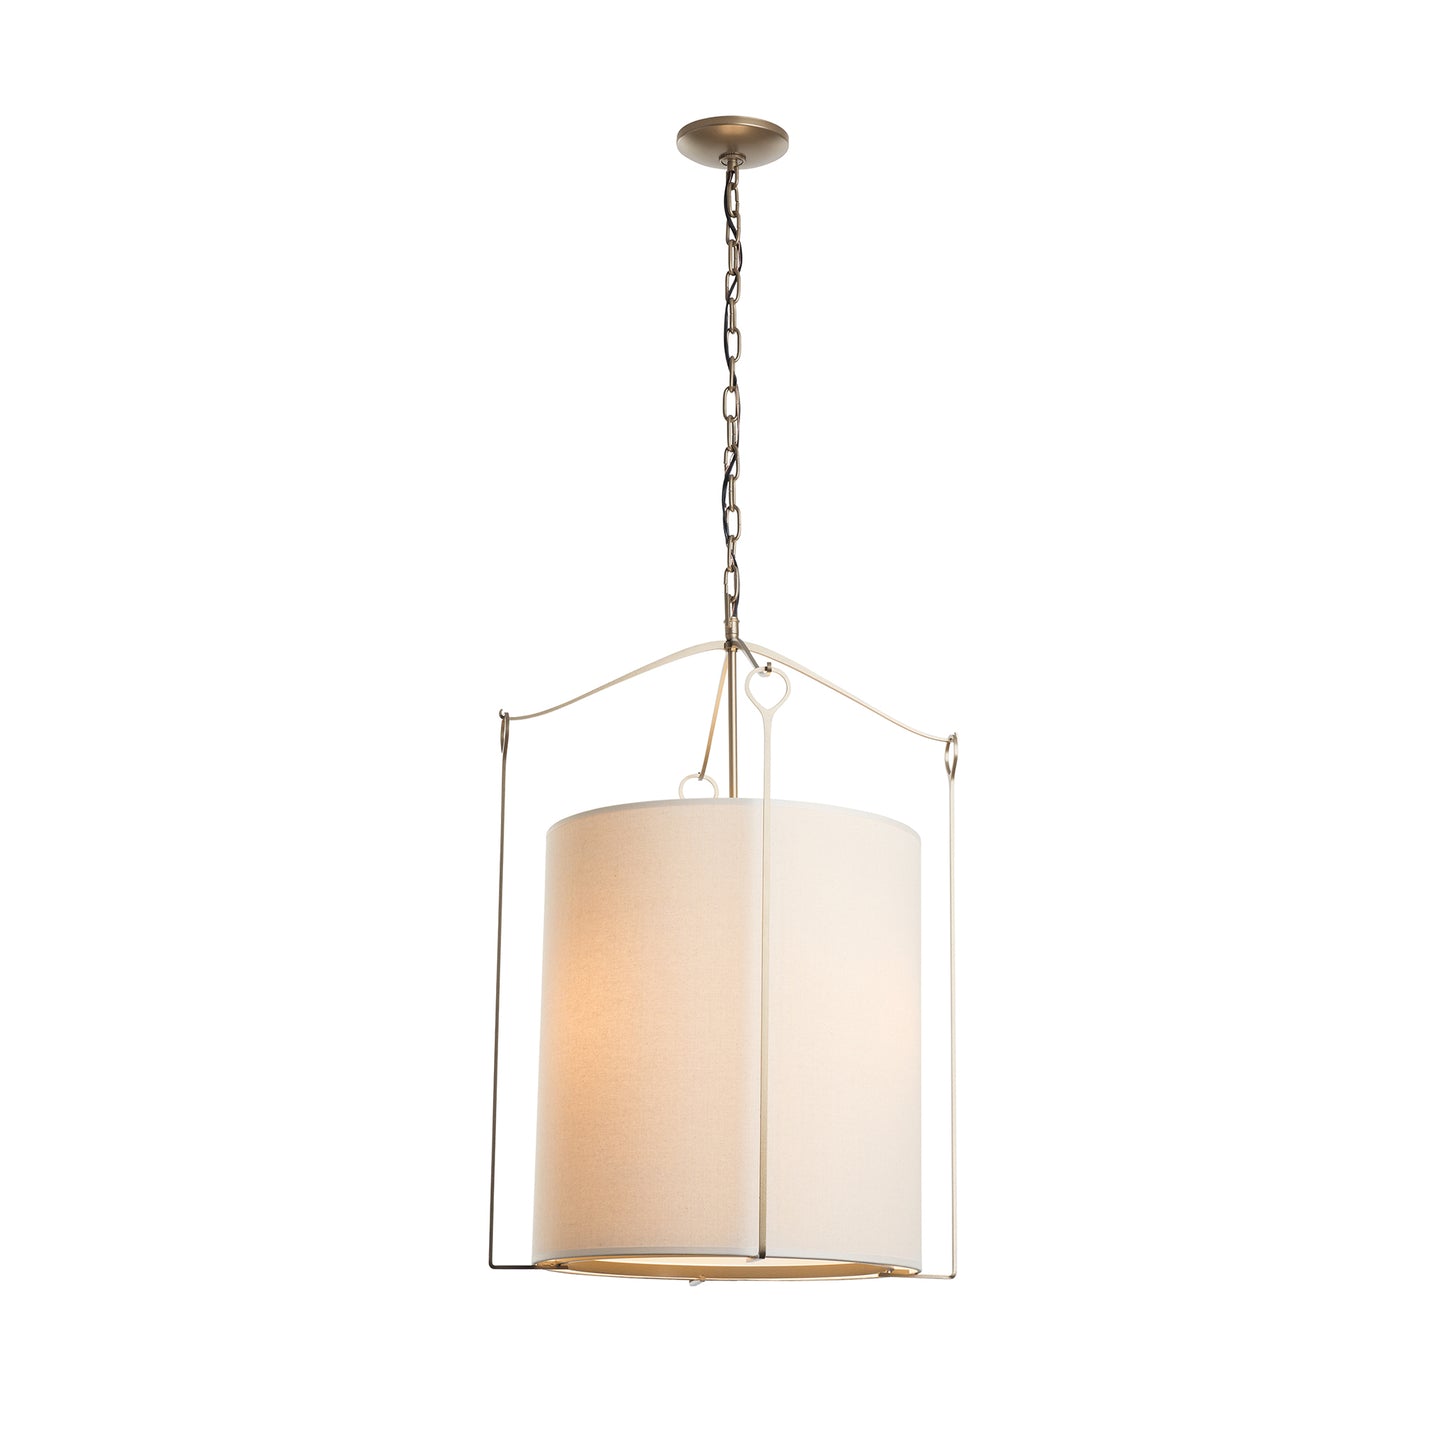 A modern Hubbardton Forge Tall Bow Pendant light featuring a cylindrical off-white shade within a thin metal frame, suspended from the ceiling by a chain.